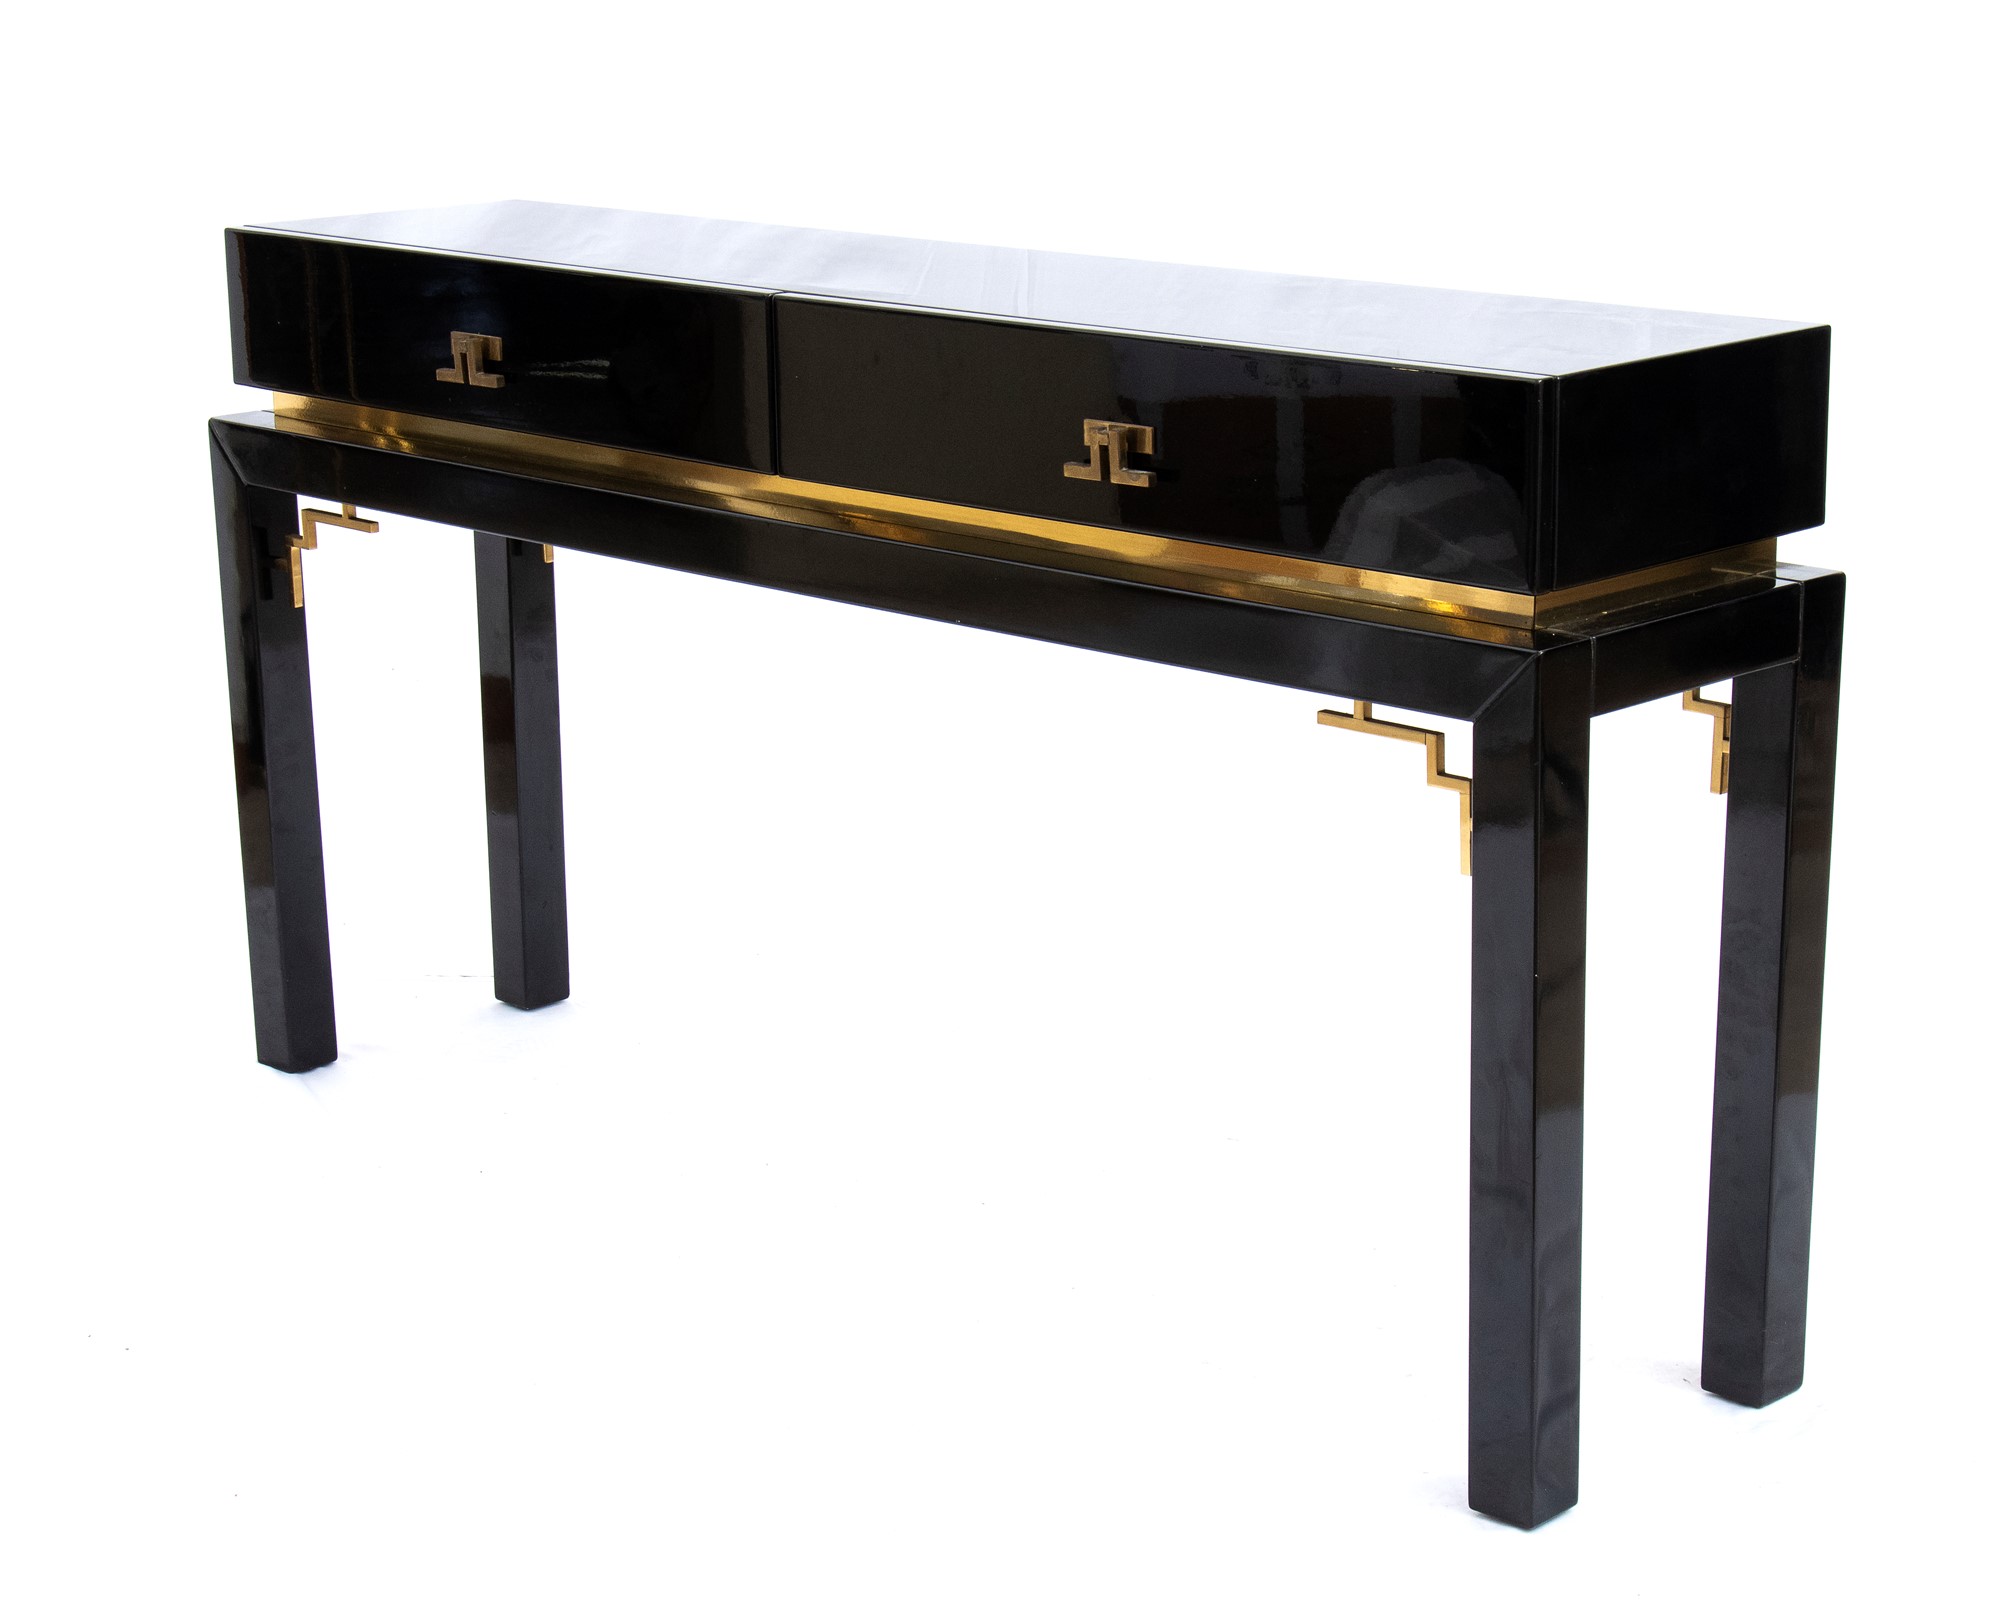 Console in lacquered wood and brass with two drawers at the front - Image 15 of 19